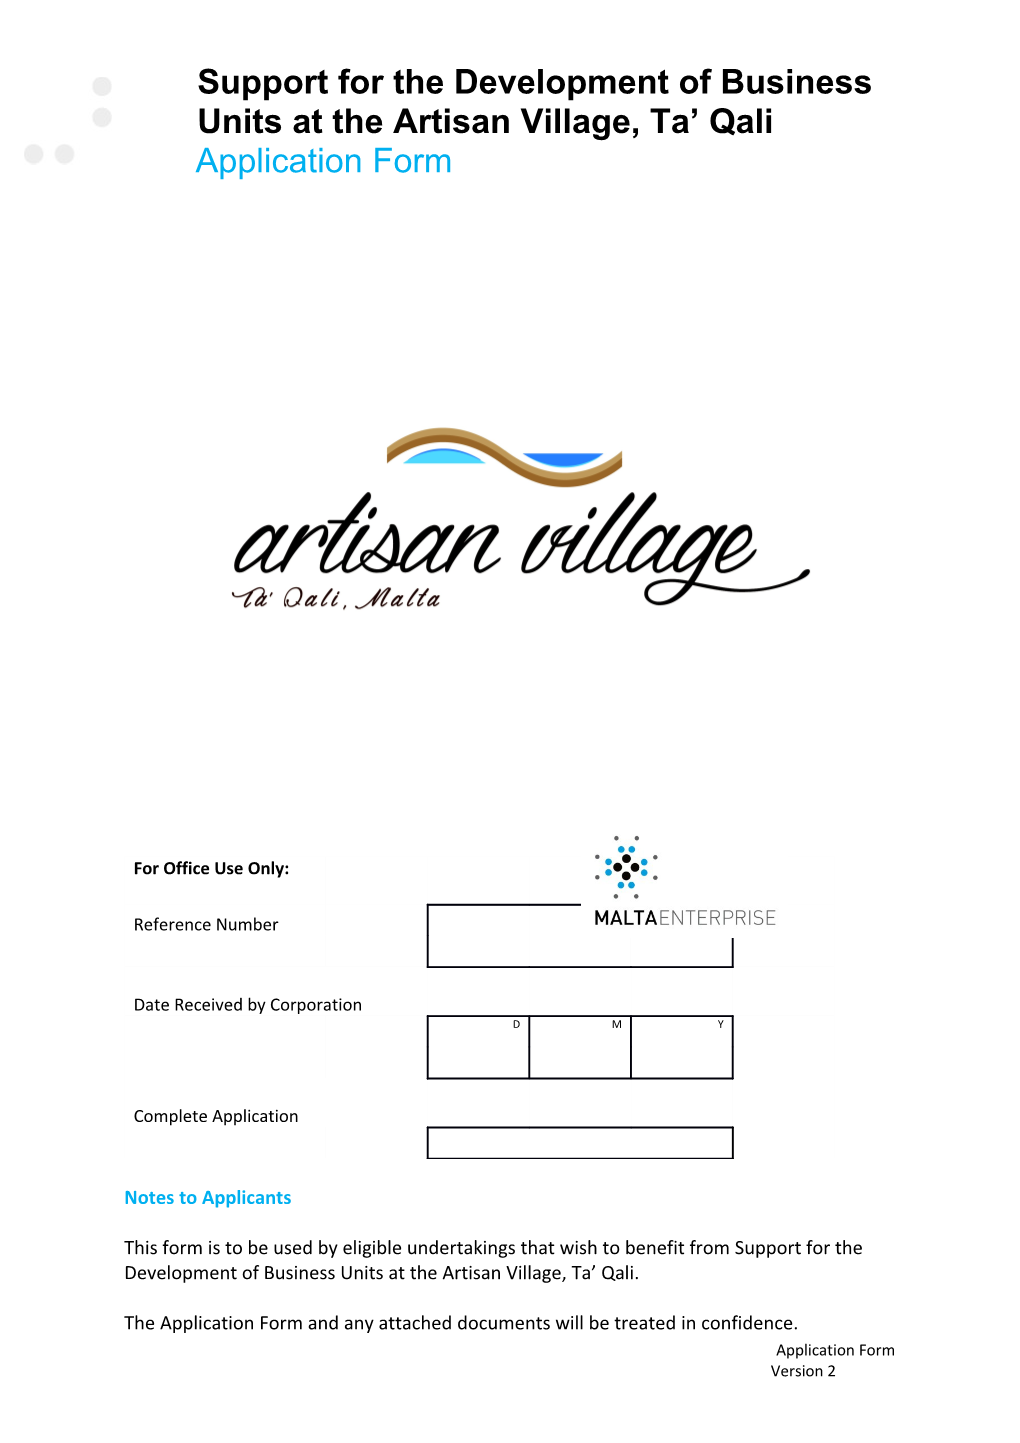 Support for the Development of Business Units at the Artisan Village, Ta Qali